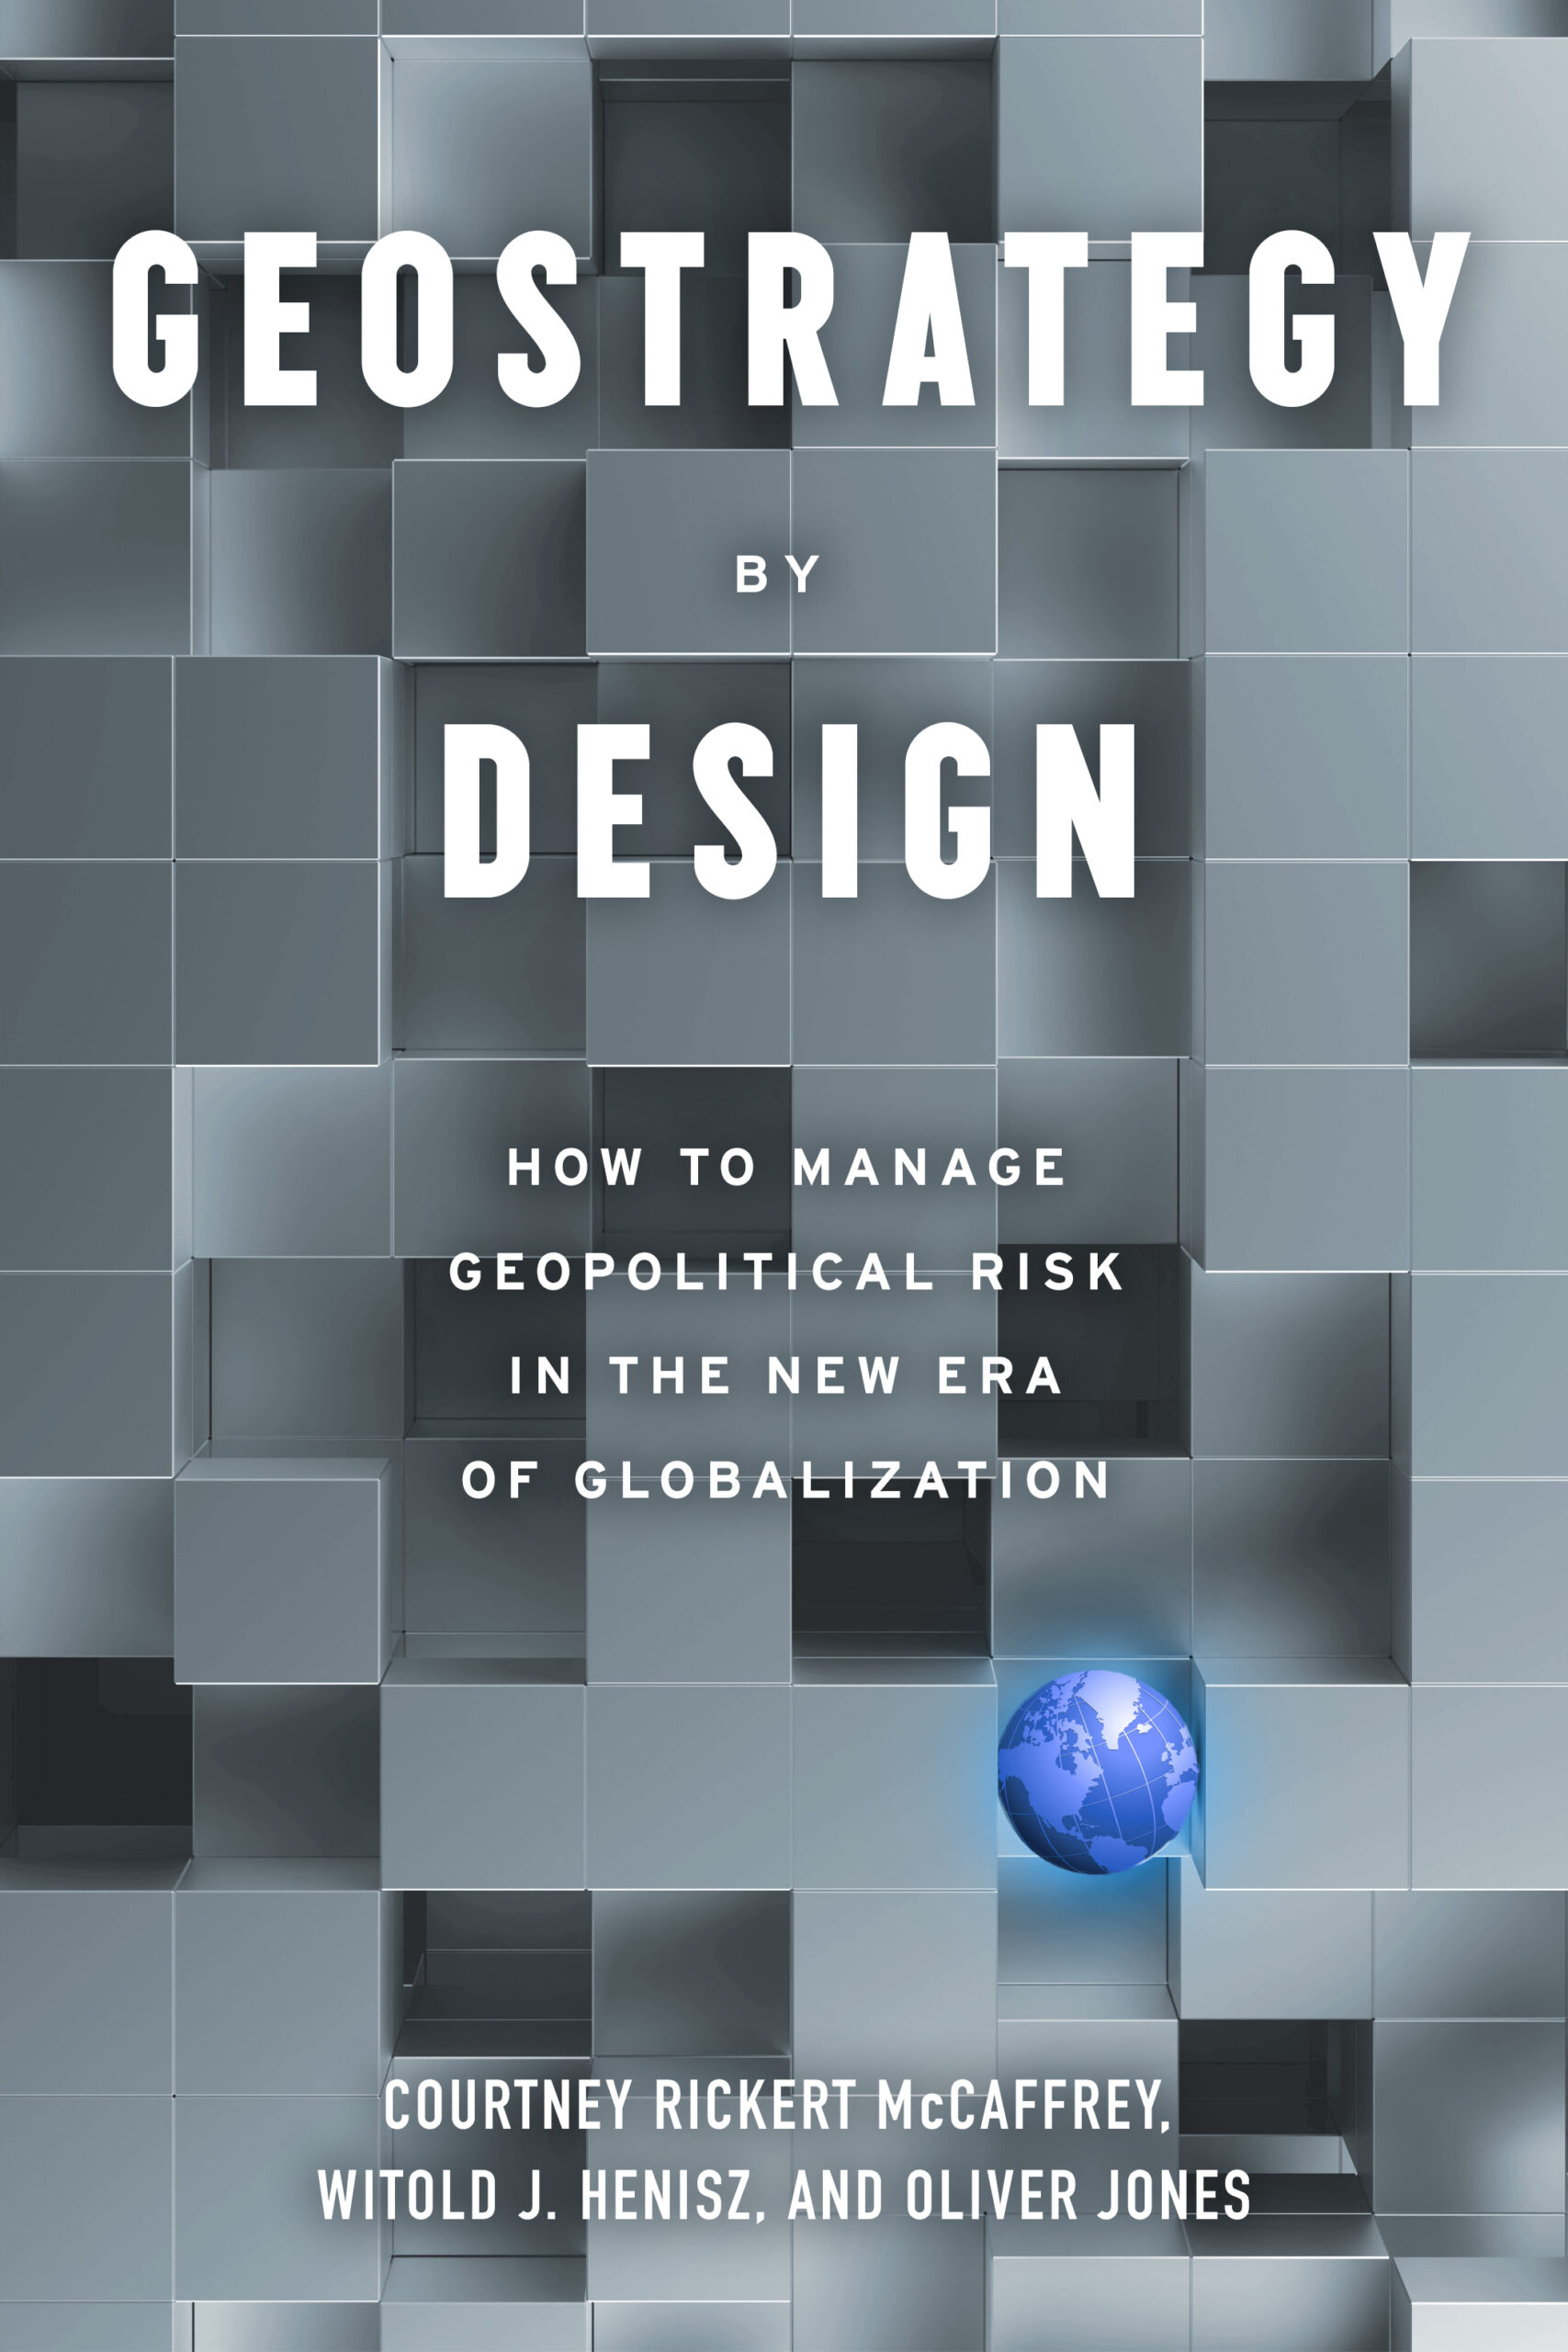 Book cover that says "Geostrategy by Design: How to manage geopolitical risk in the new era of globalization" by "Courtney Rickert McCaffrey, Witold J. Henisz, and Oliver Jones." The background is grey with cubes.